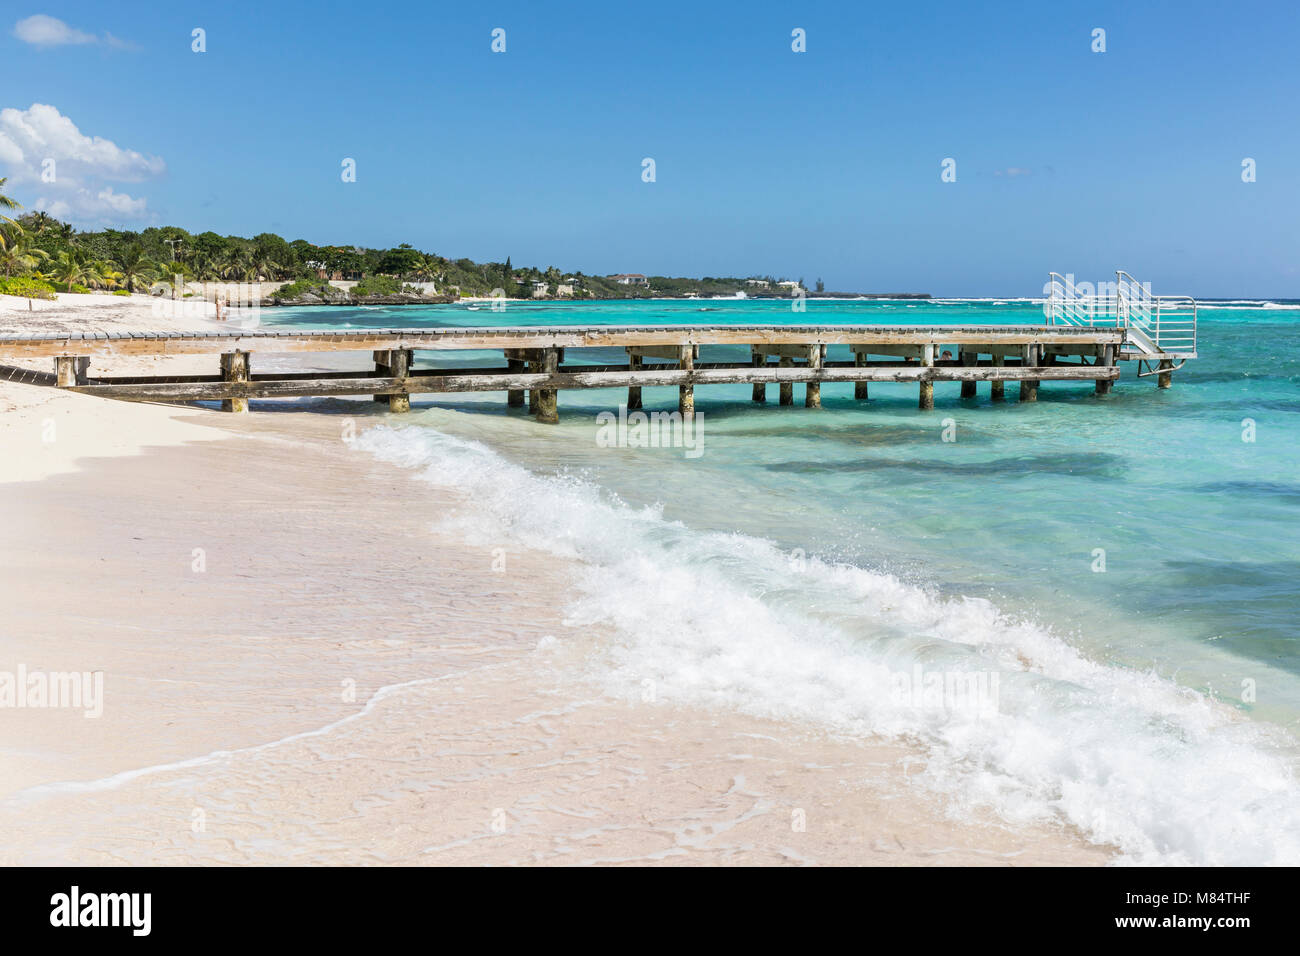 A wooden pier juts into the Carribbean on Spotts Beach in Savannah on the South side of Grand Cayman, Cayman Islands Stock Photo